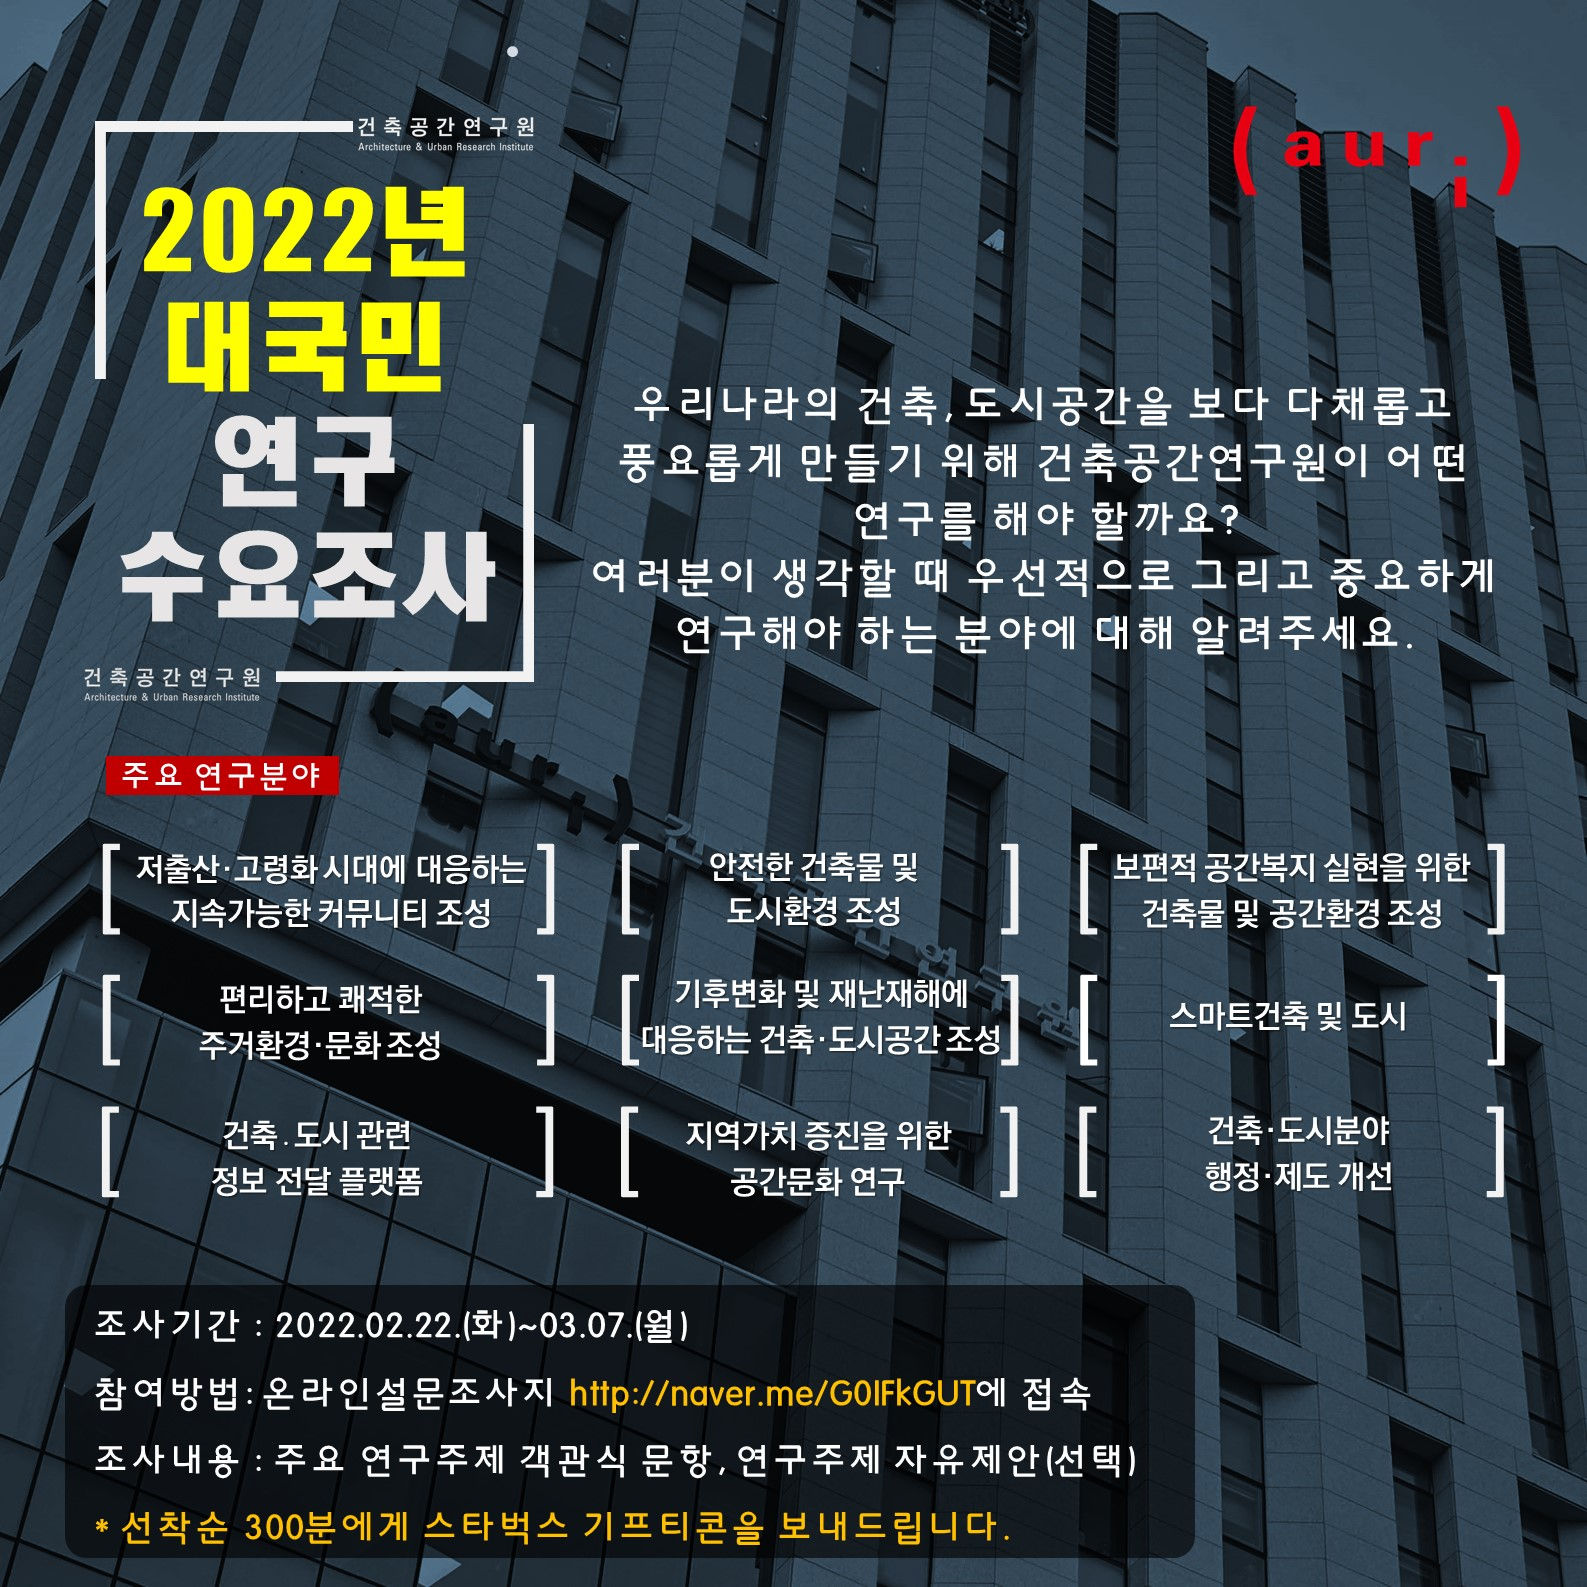 You are currently viewing 2022년도 auri 대국민 연구수요조사